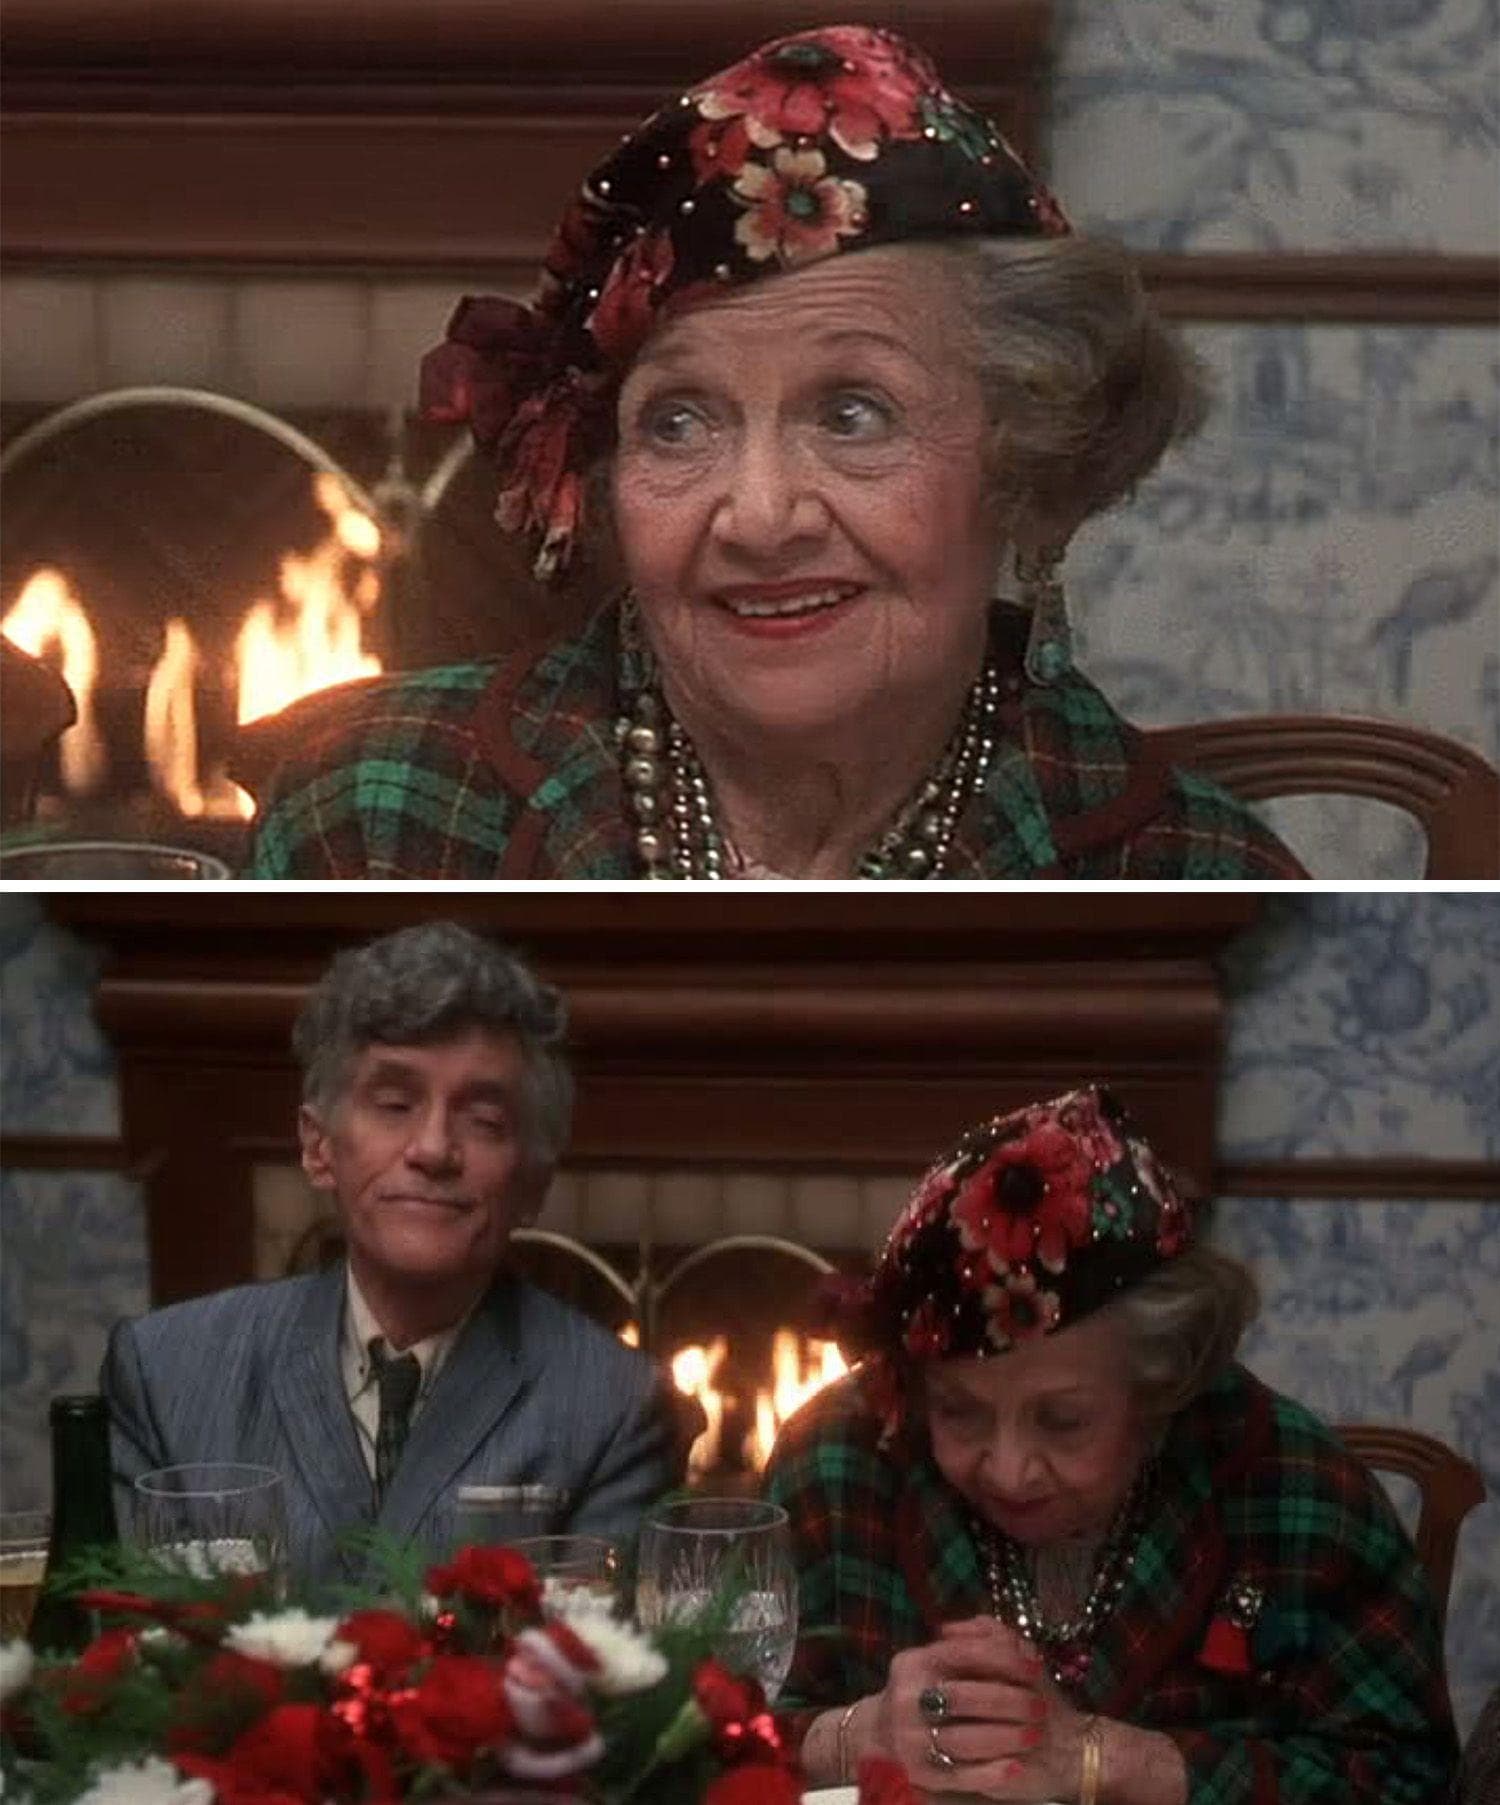 Random Interesting Details From 'Christmas Vacation' That Make Us Think It's Time For A Rewatch